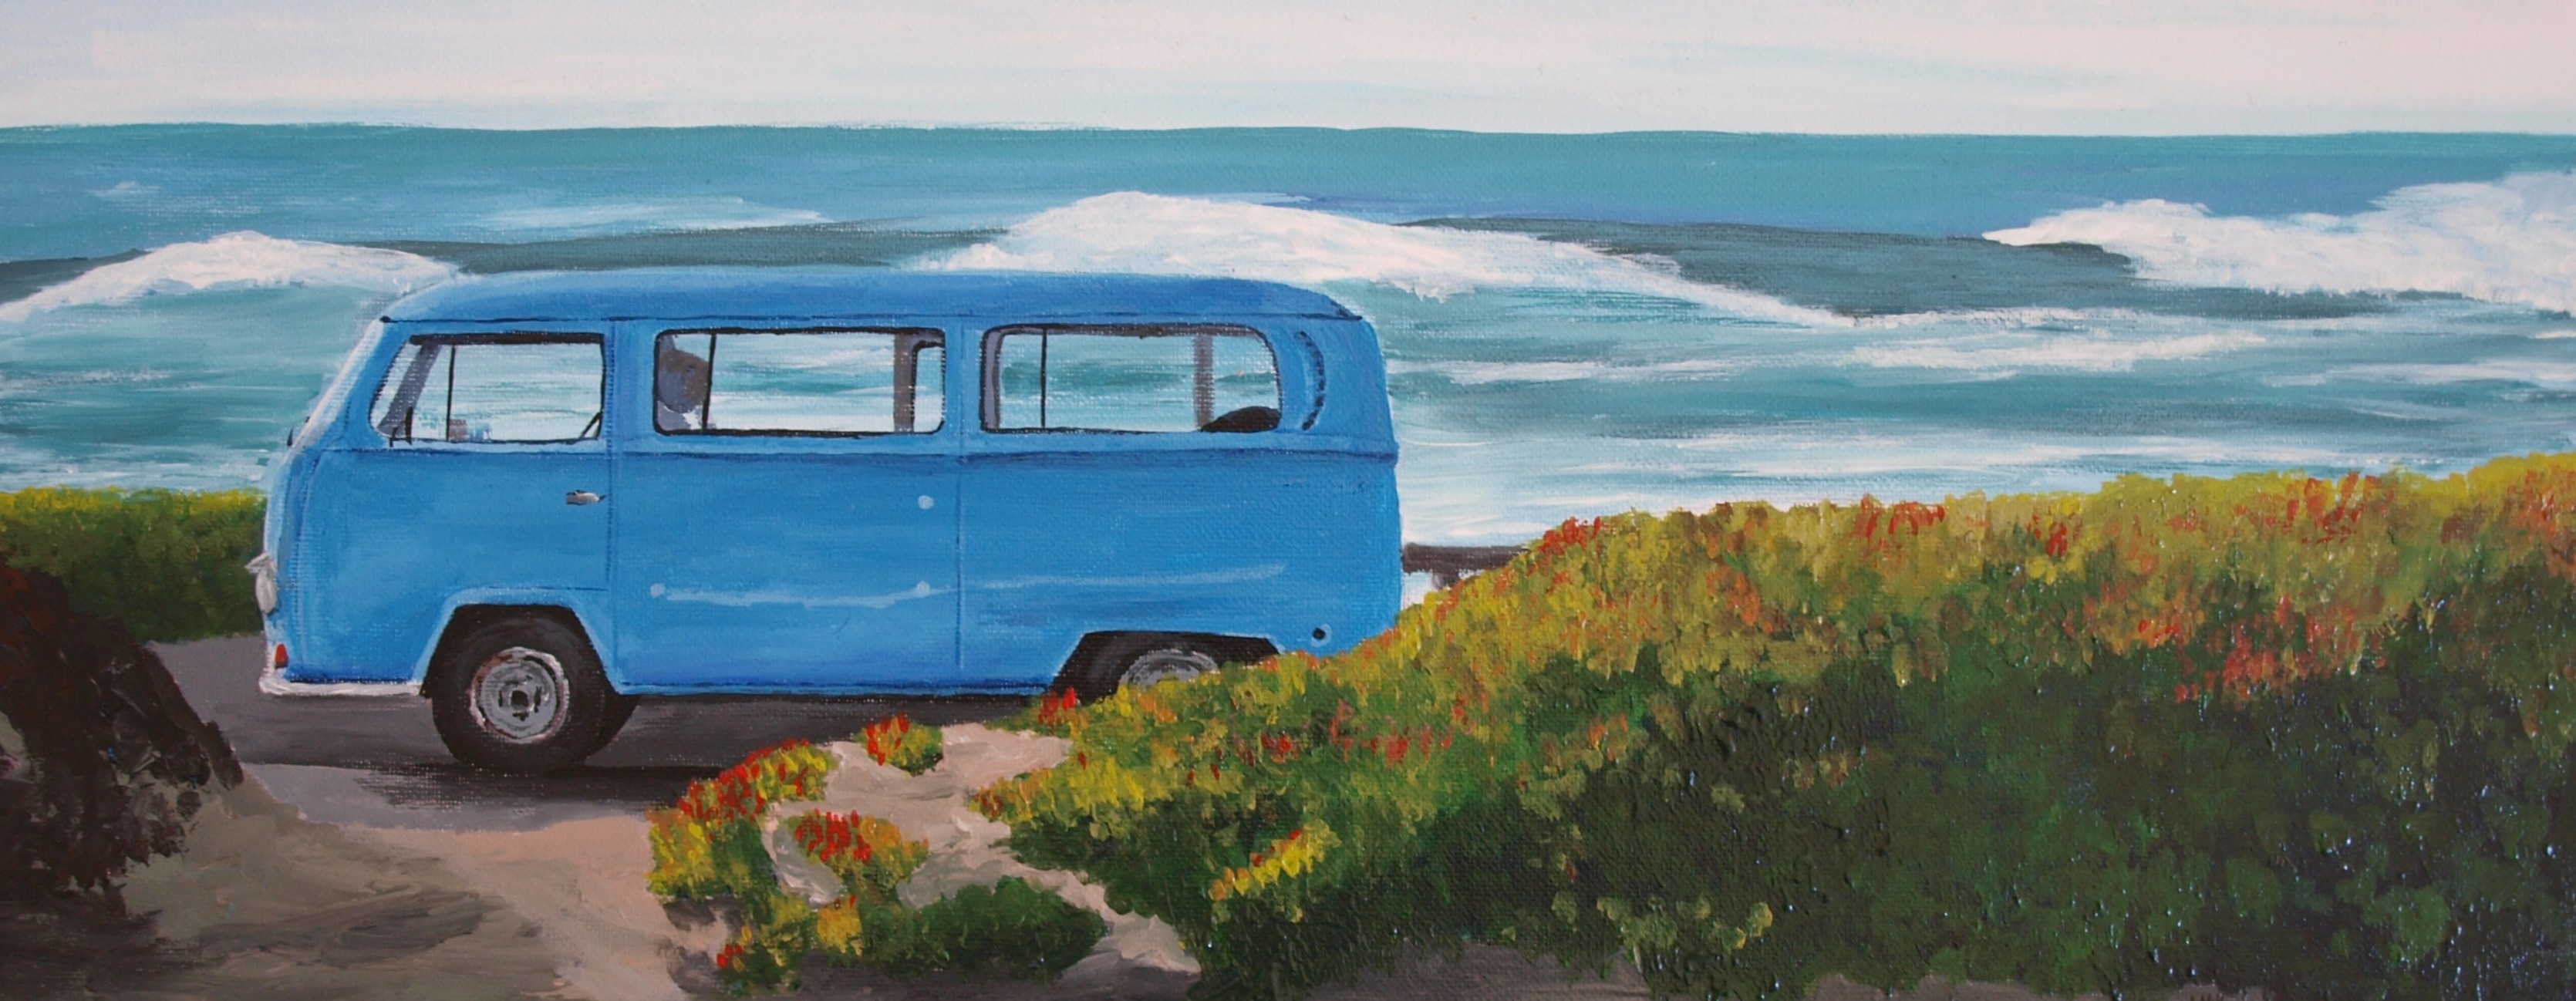 VW Bay Window Campervan by the Sea pen and ink illustration by Louisa Hill